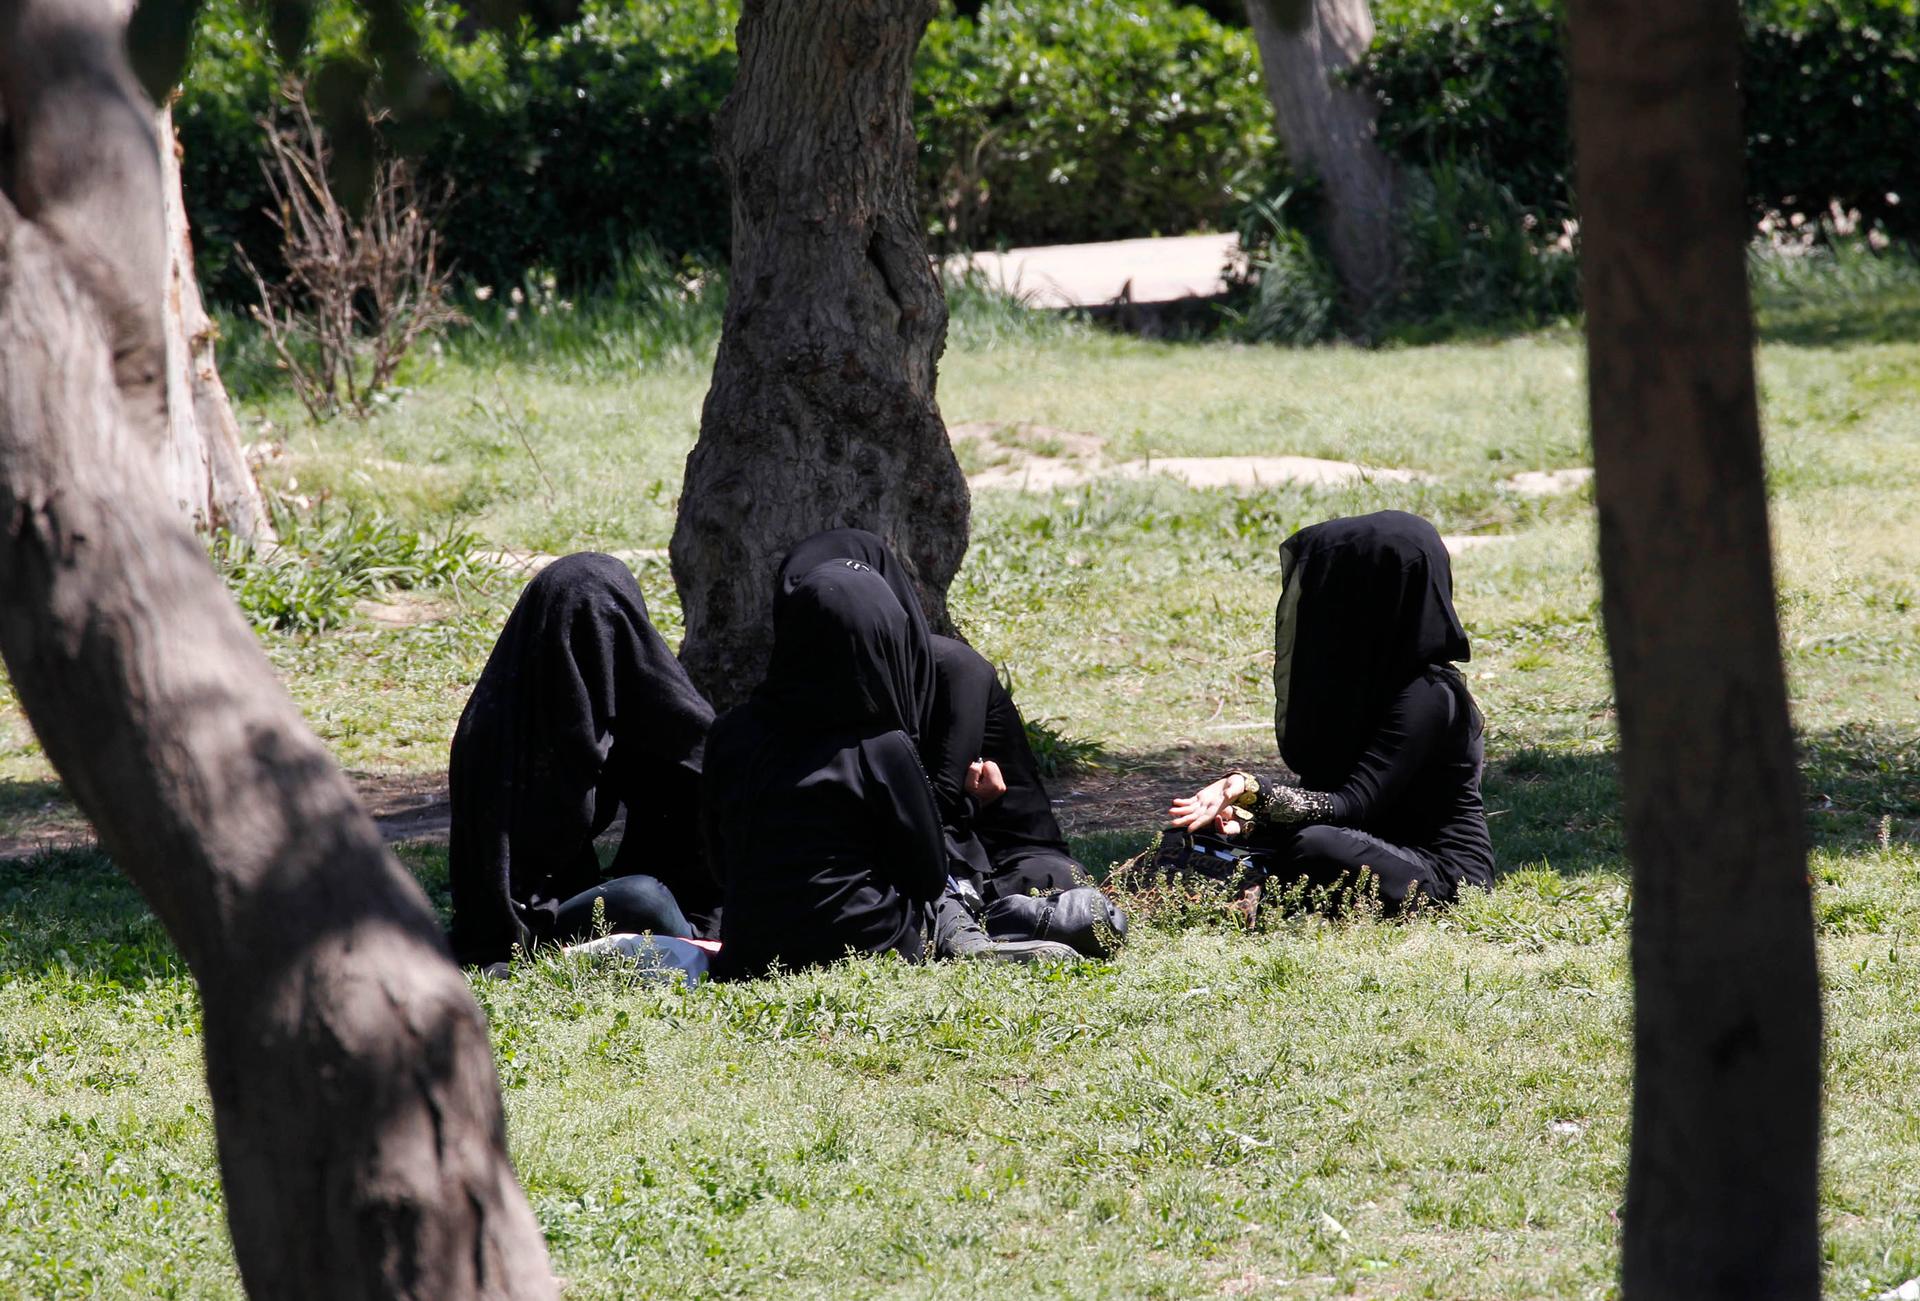 Veiled women sit as they chat in a garden in the ISIS-controlled province of Raqqa in northern Syria.